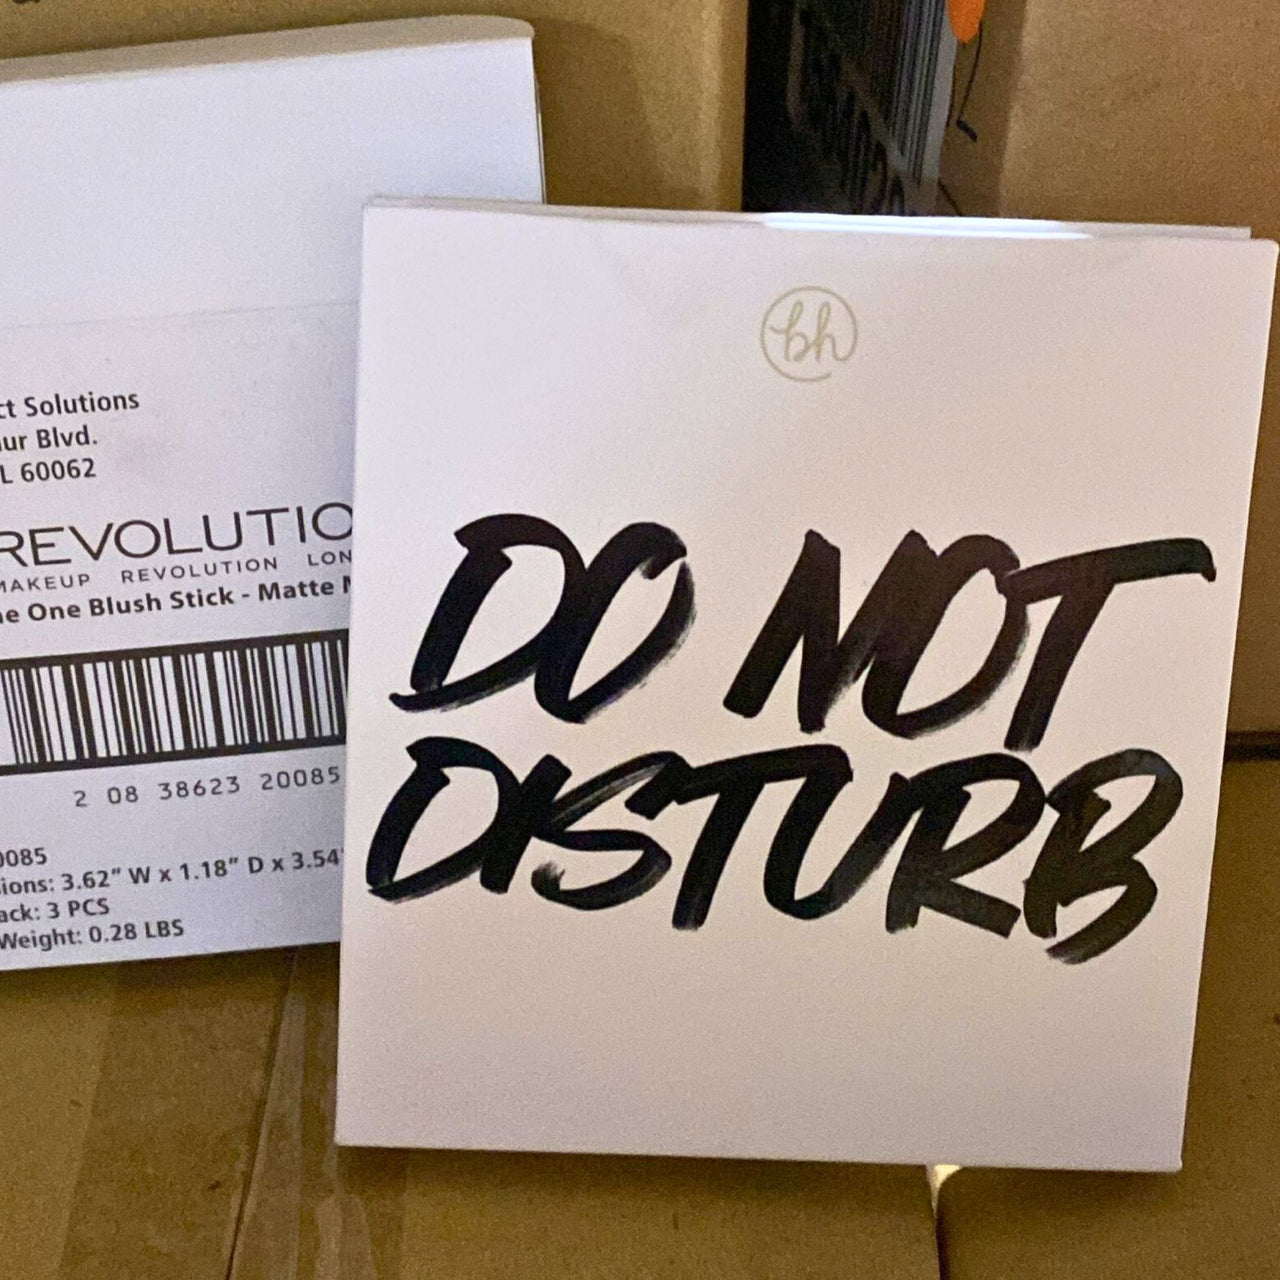 BH Cosmetics Do Not Disturb 9 Color Shadow Palette